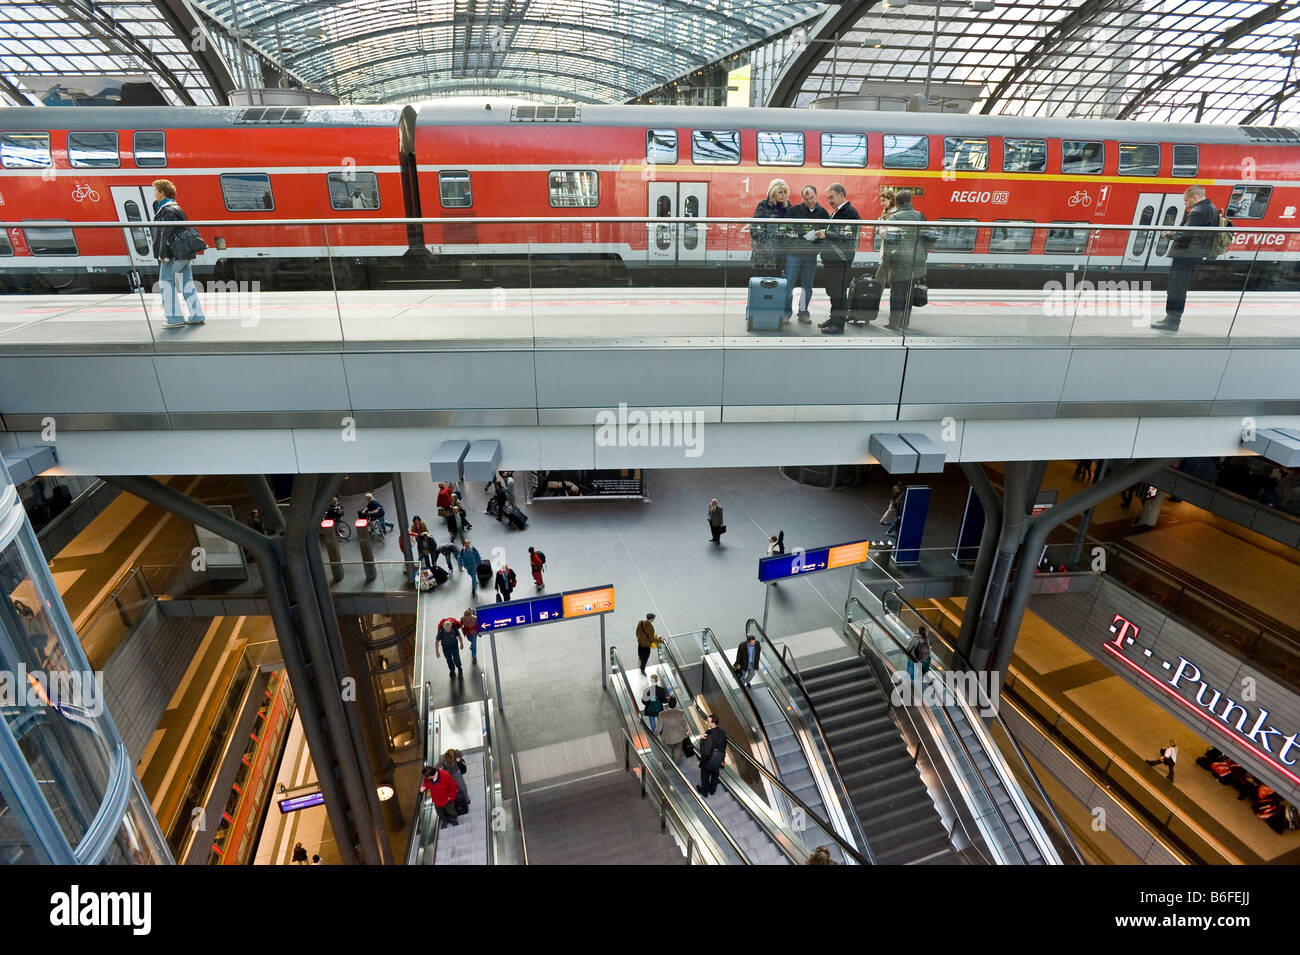 Berlin Central Station, Germany, Europe Stock Photo